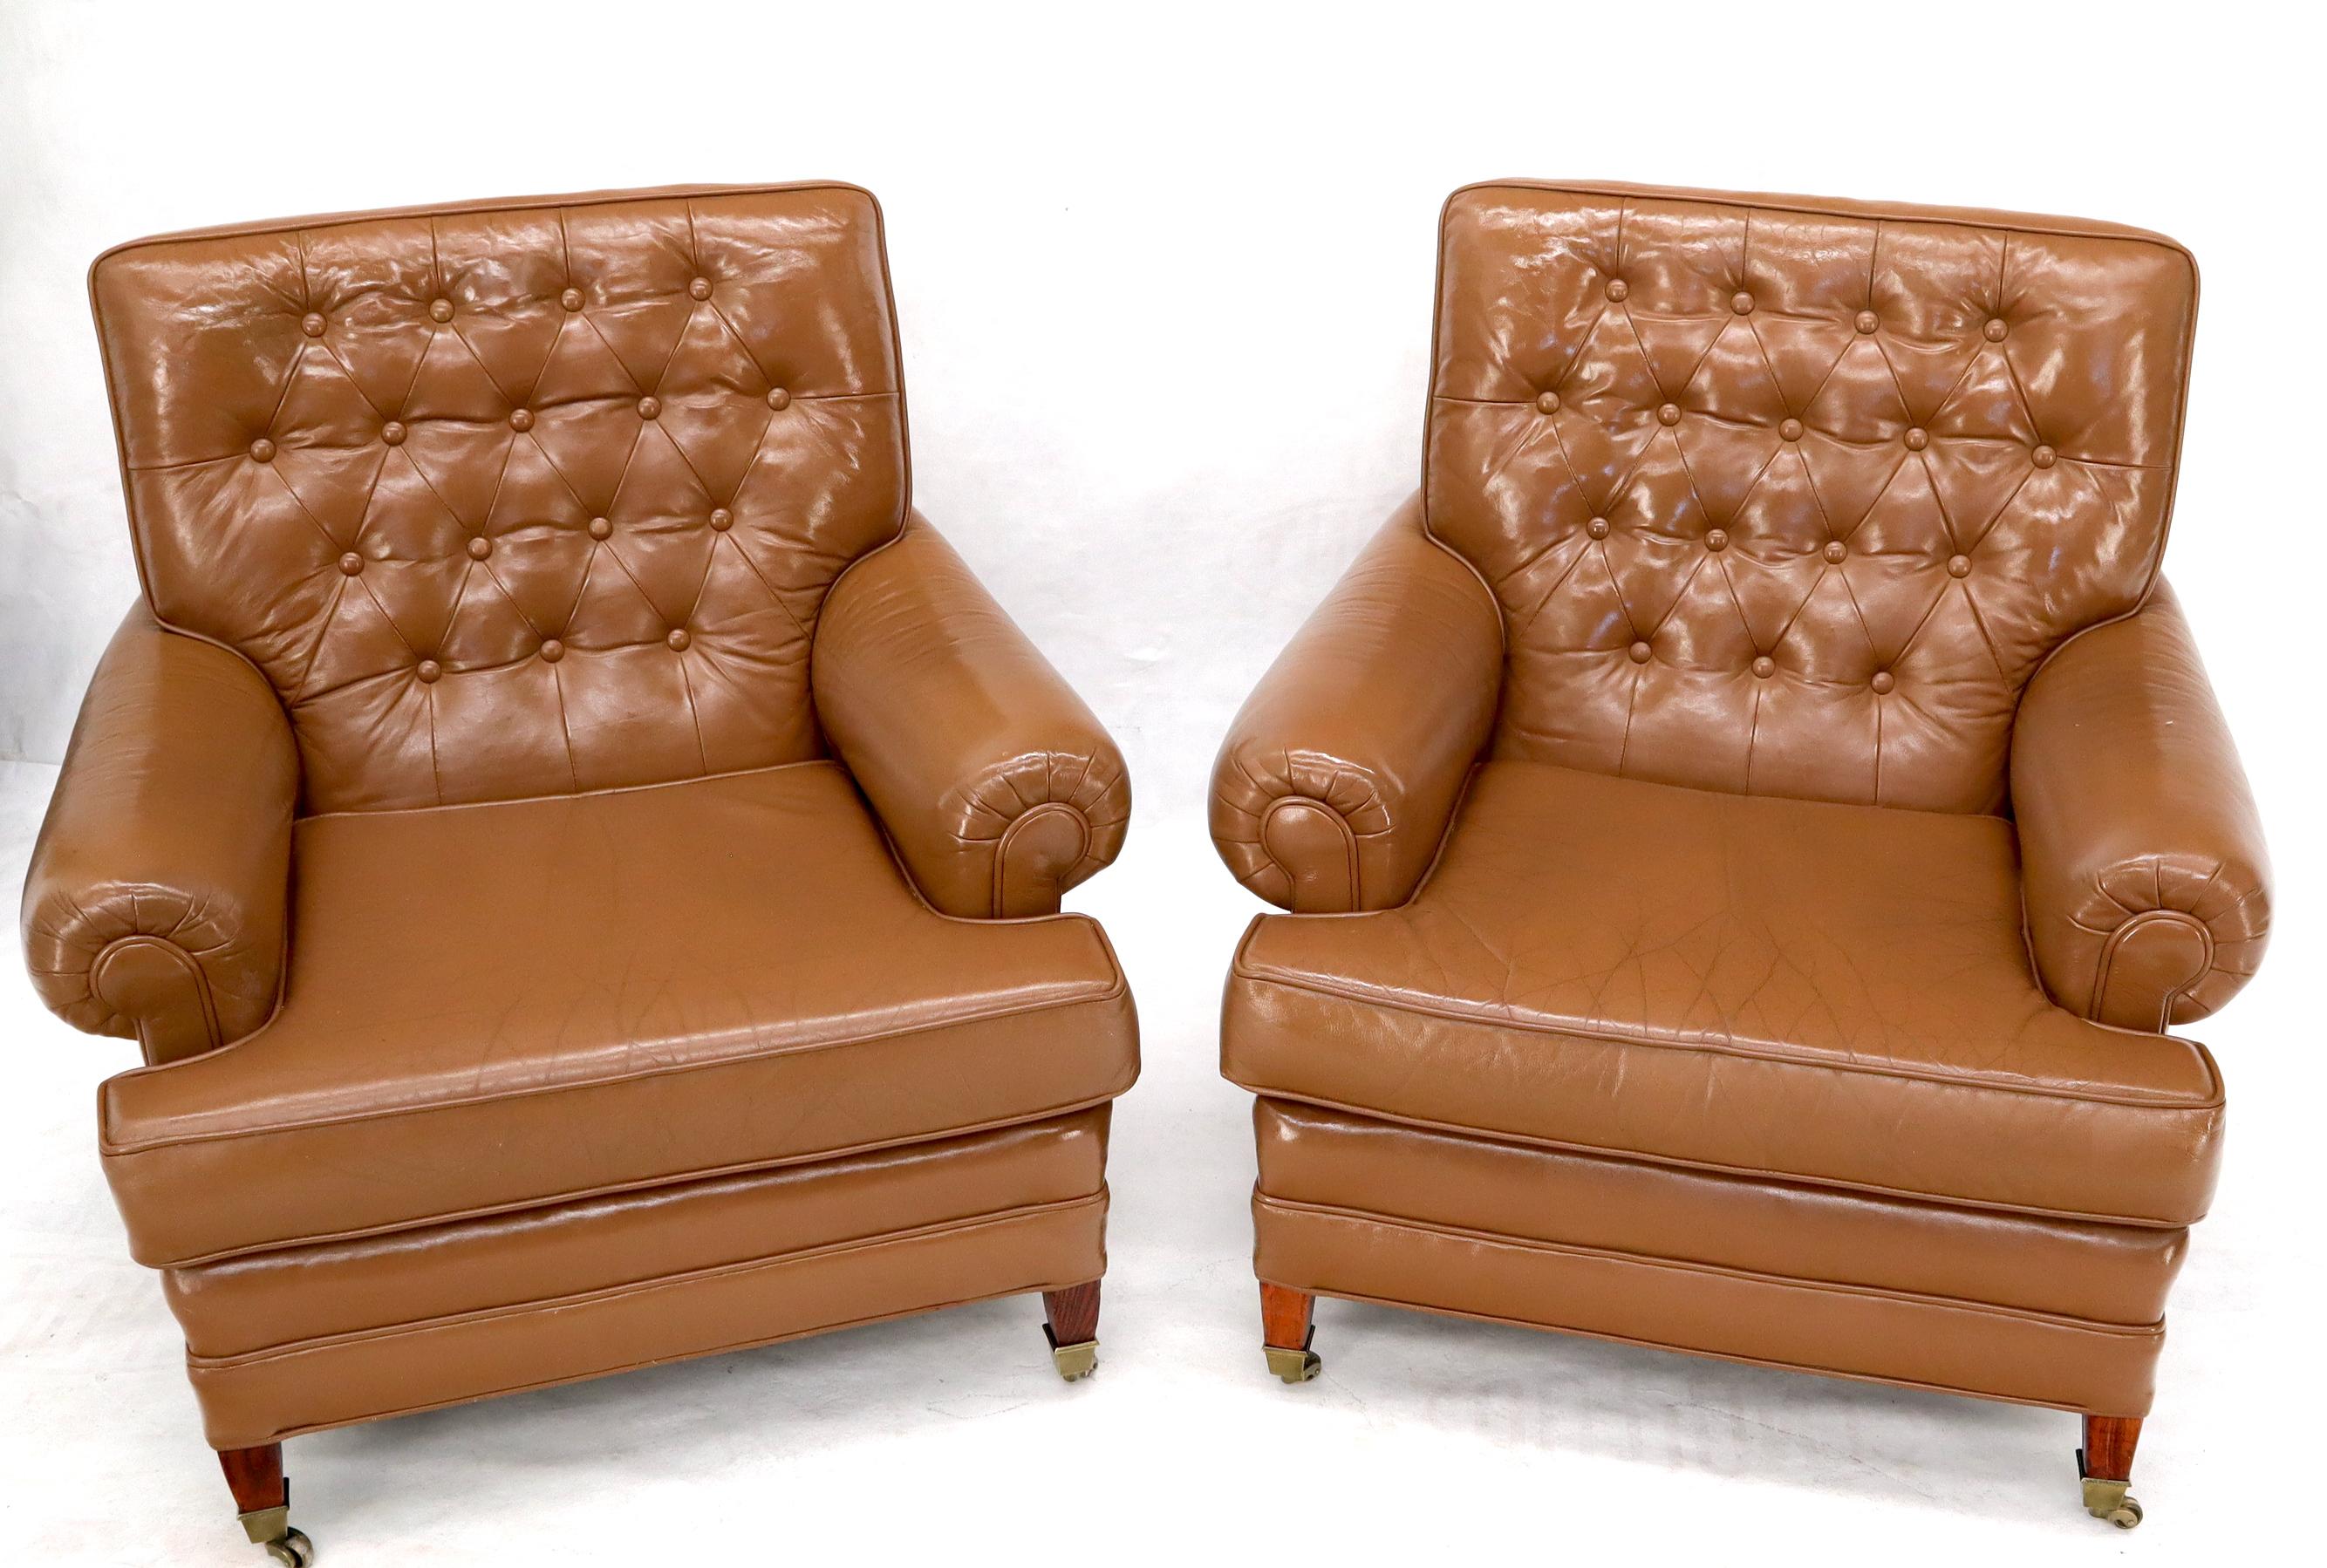 20th Century Pair of Chesterfield Style Leather Chairs W/ Ottomans Brown to Tan For Sale